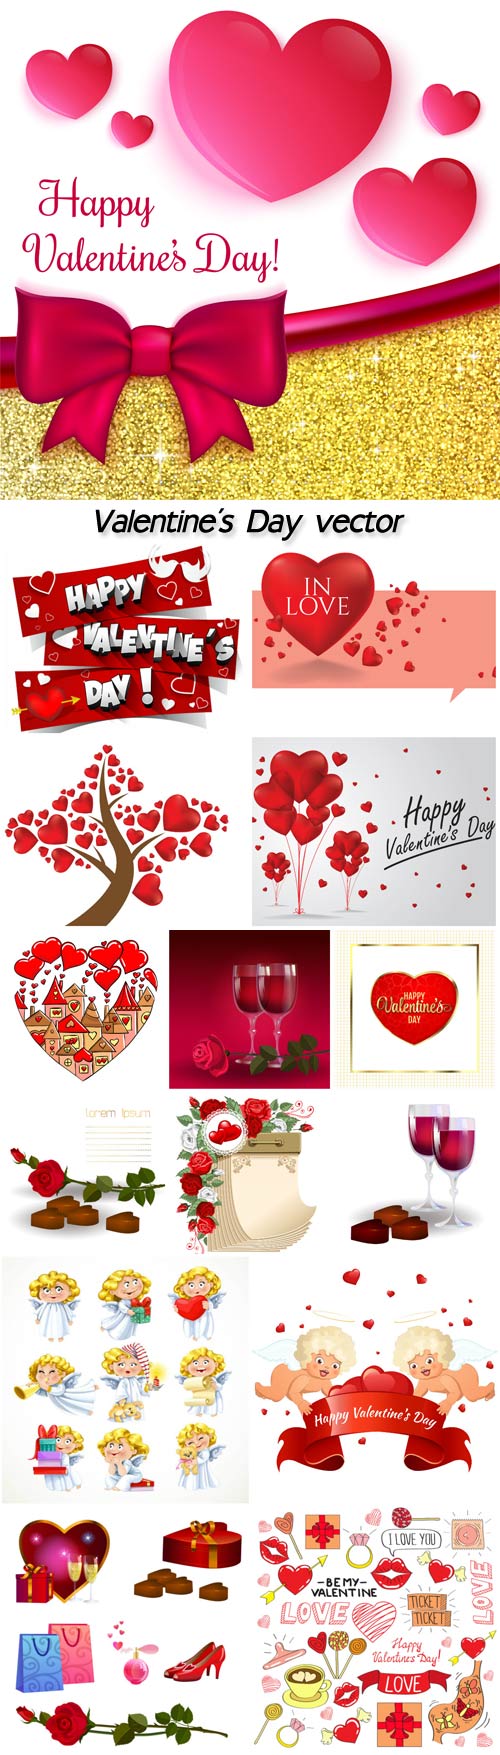 Valentine's Day vector, flowers, hearts, cupids